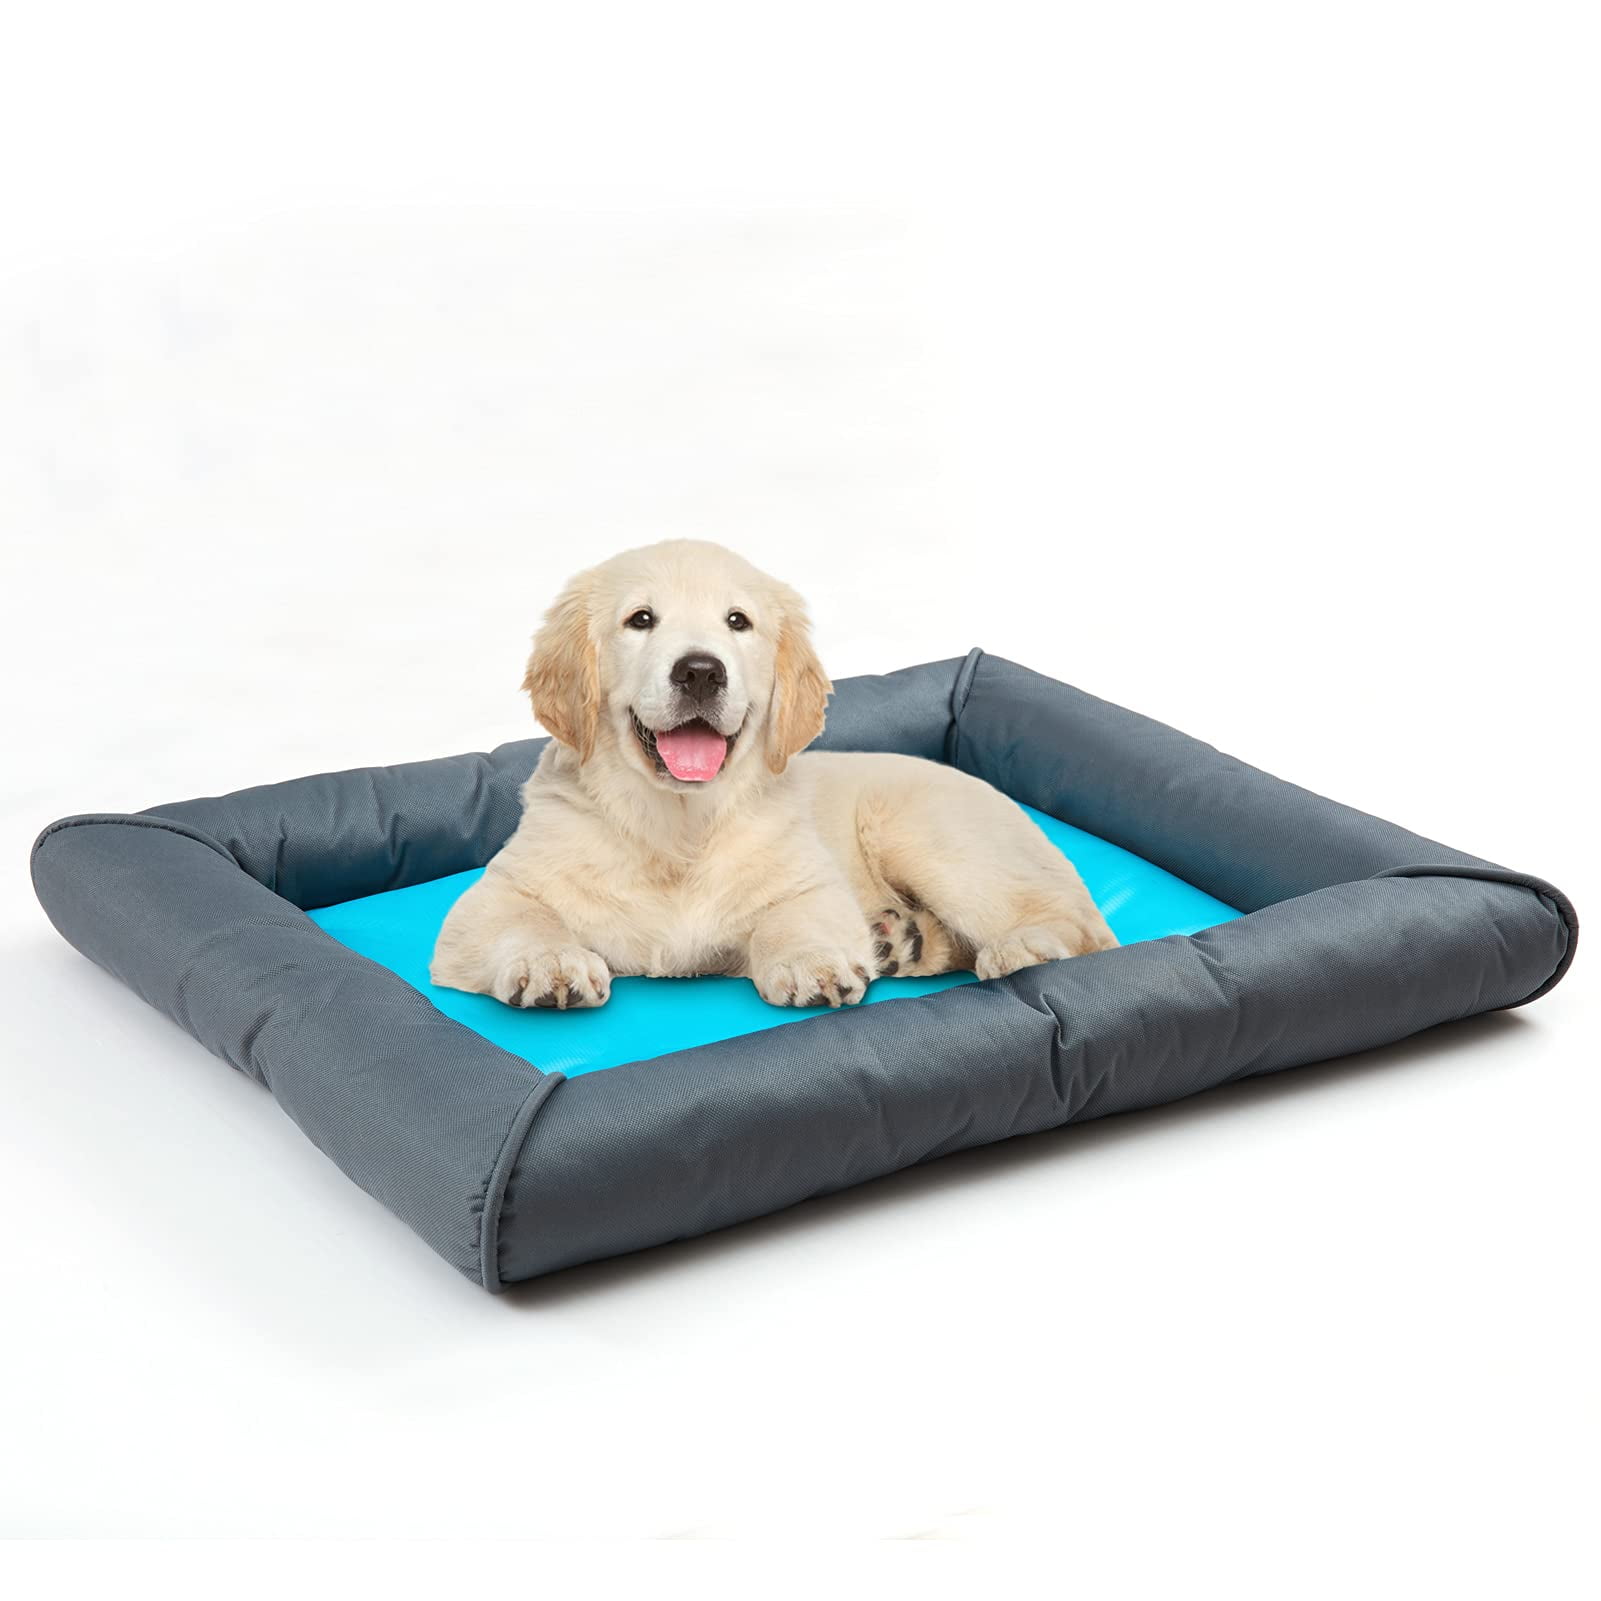 20x30” Inches Large Dog Cooling Mat for Large Dogs - Water Injection Pet  Cooling Pad, Durable Cooling Dog Bed Mats for Large Dogs Cats, Blue Ocean  for Sale in Torrance, CA - OfferUp